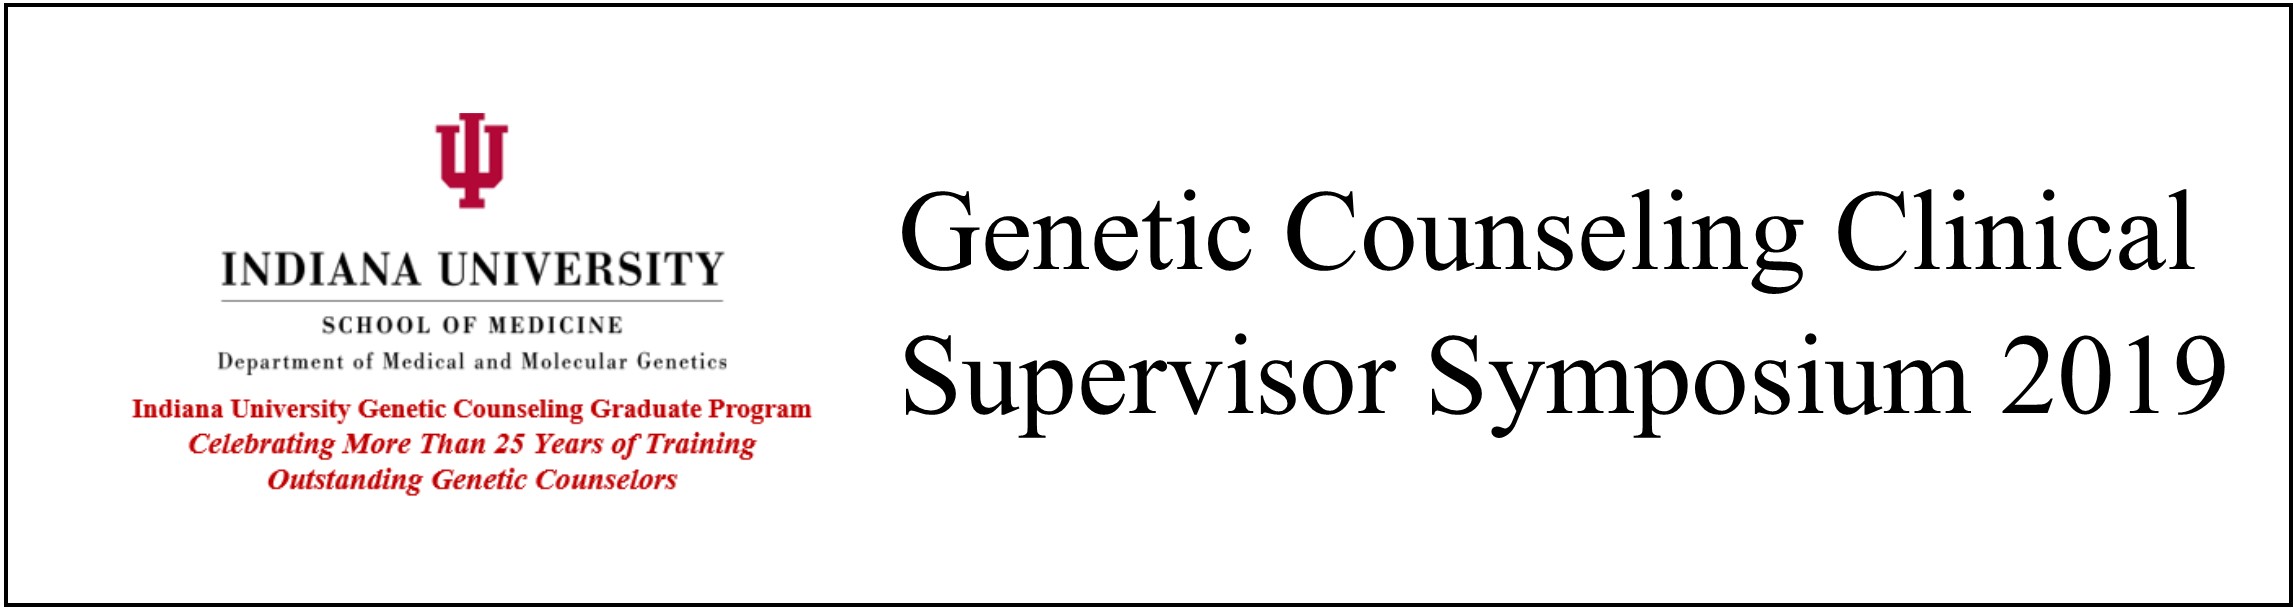 Genetic Counseling Clinical Supervisor Symposium Banner